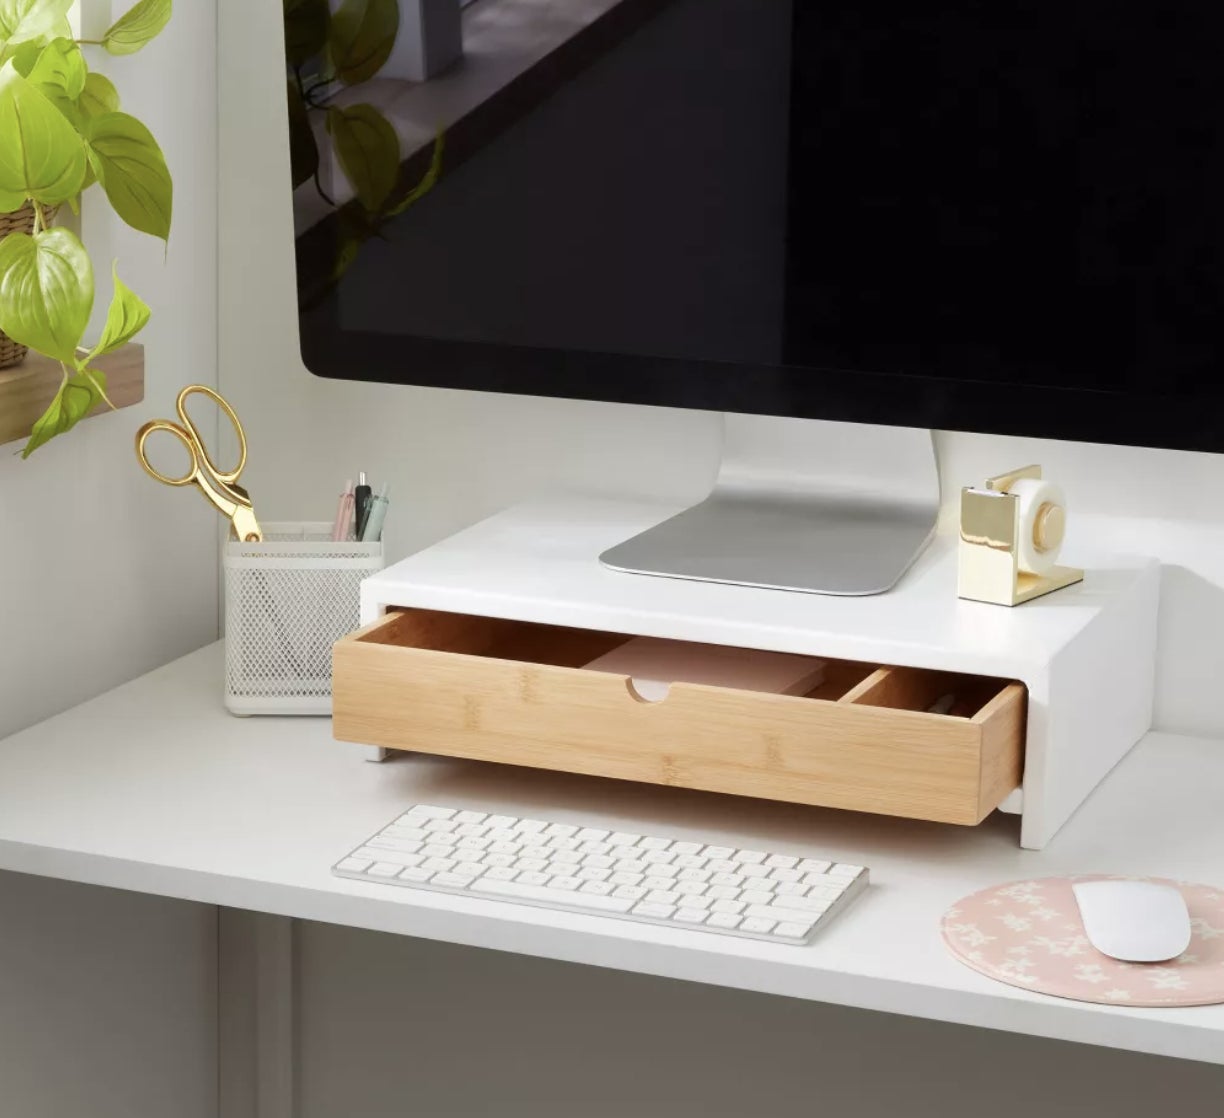 A monitor stand with a drawer